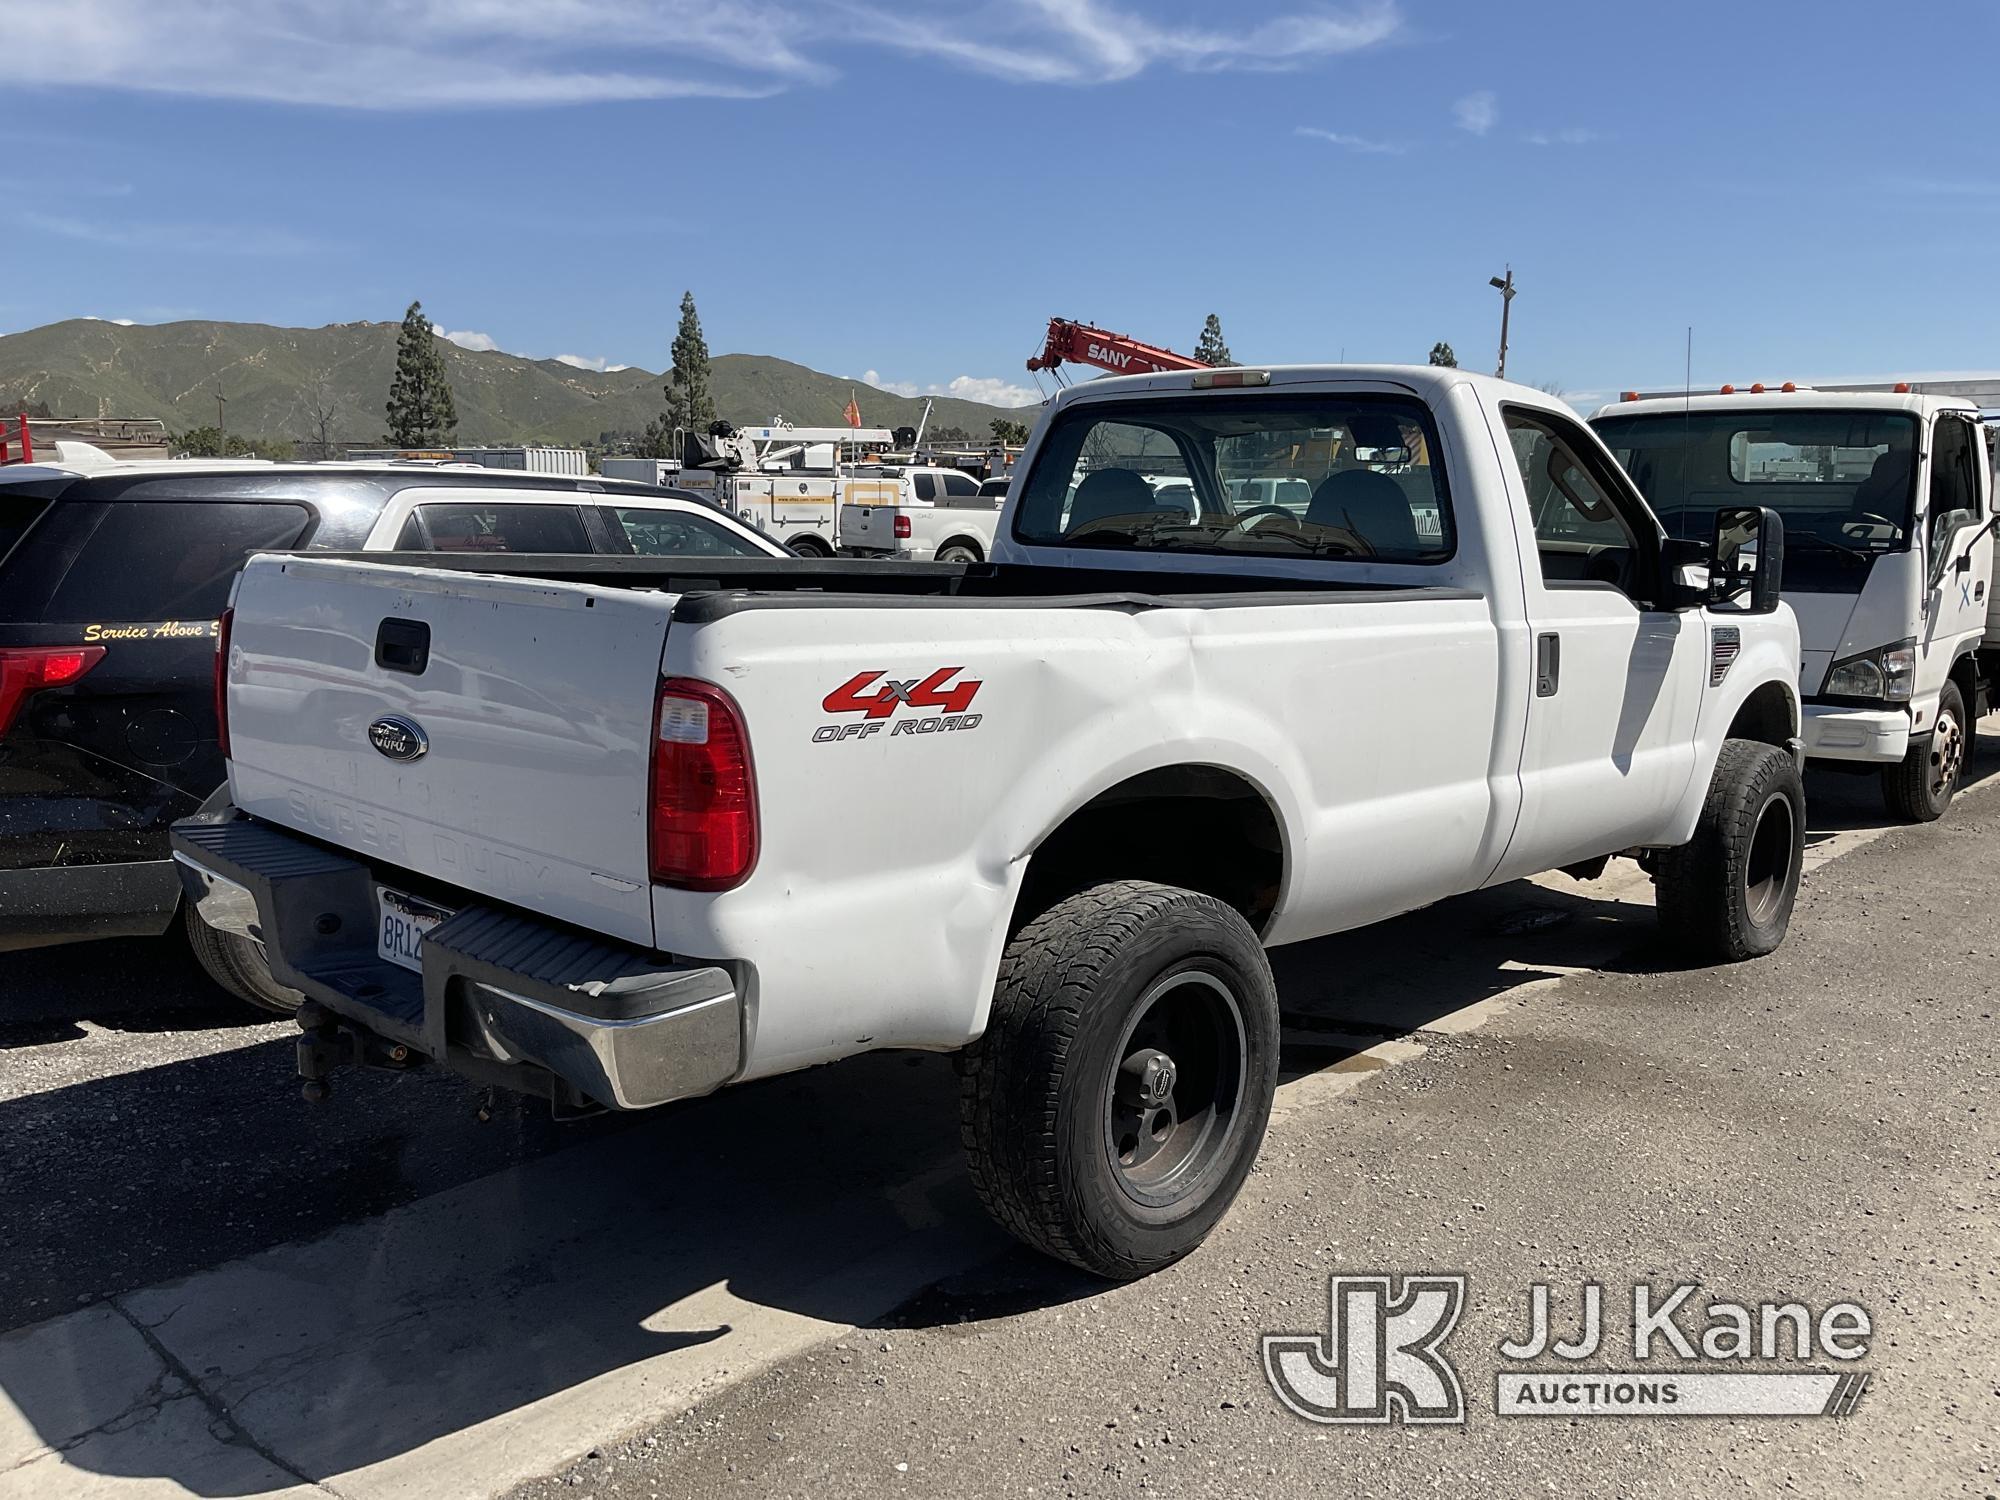 (Jurupa Valley, CA) 2008 Ford F350 4x4 Pickup Truck Not Running, Condition Unknown) (Body Damage